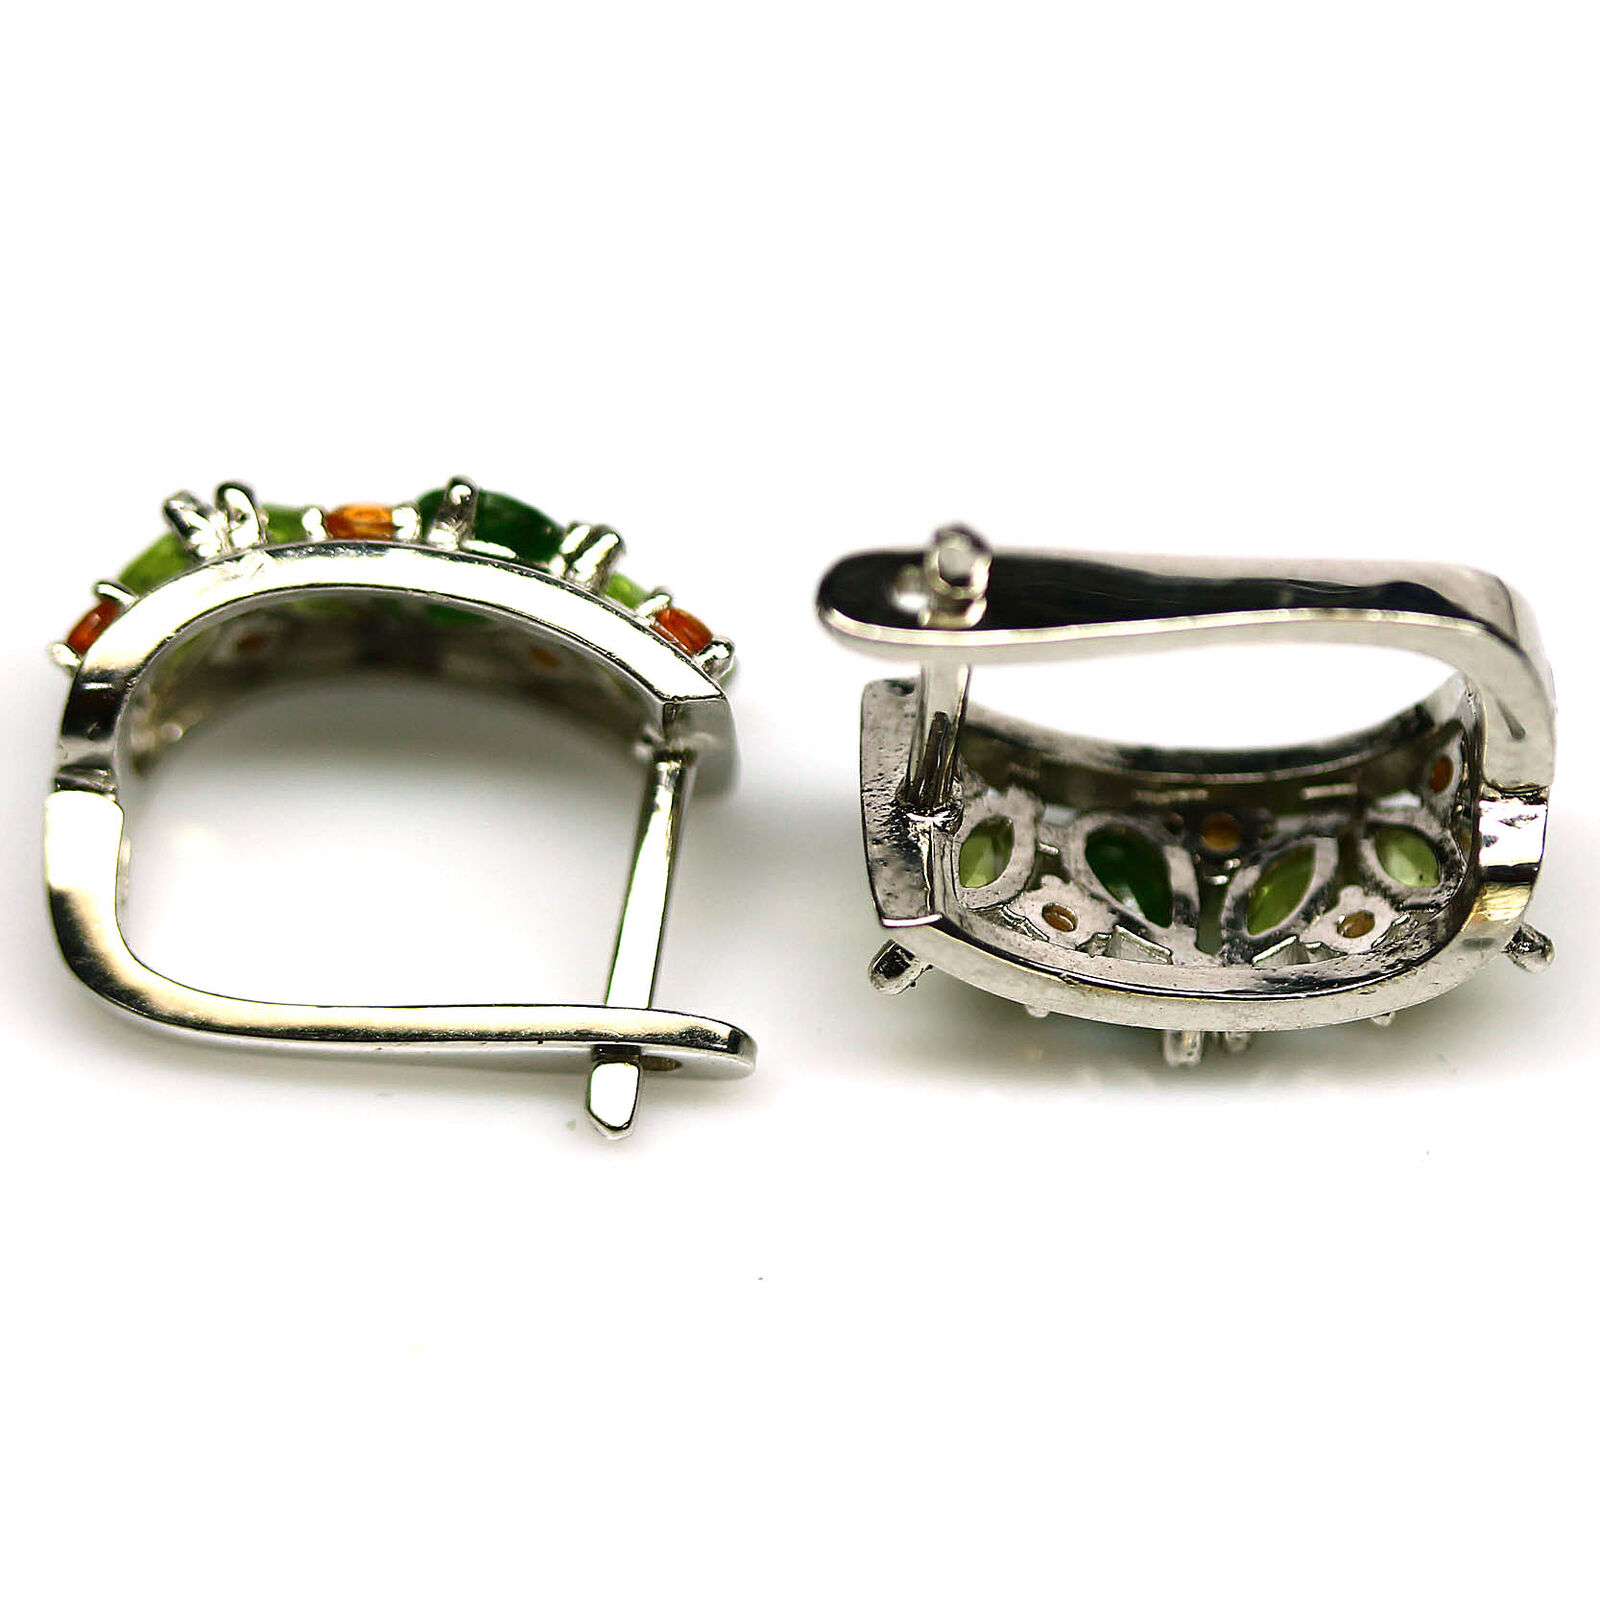 A pair of 925 silver earrings set with peridots, chrome diopsides and citrines, L. 1.5cm. - Image 2 of 2